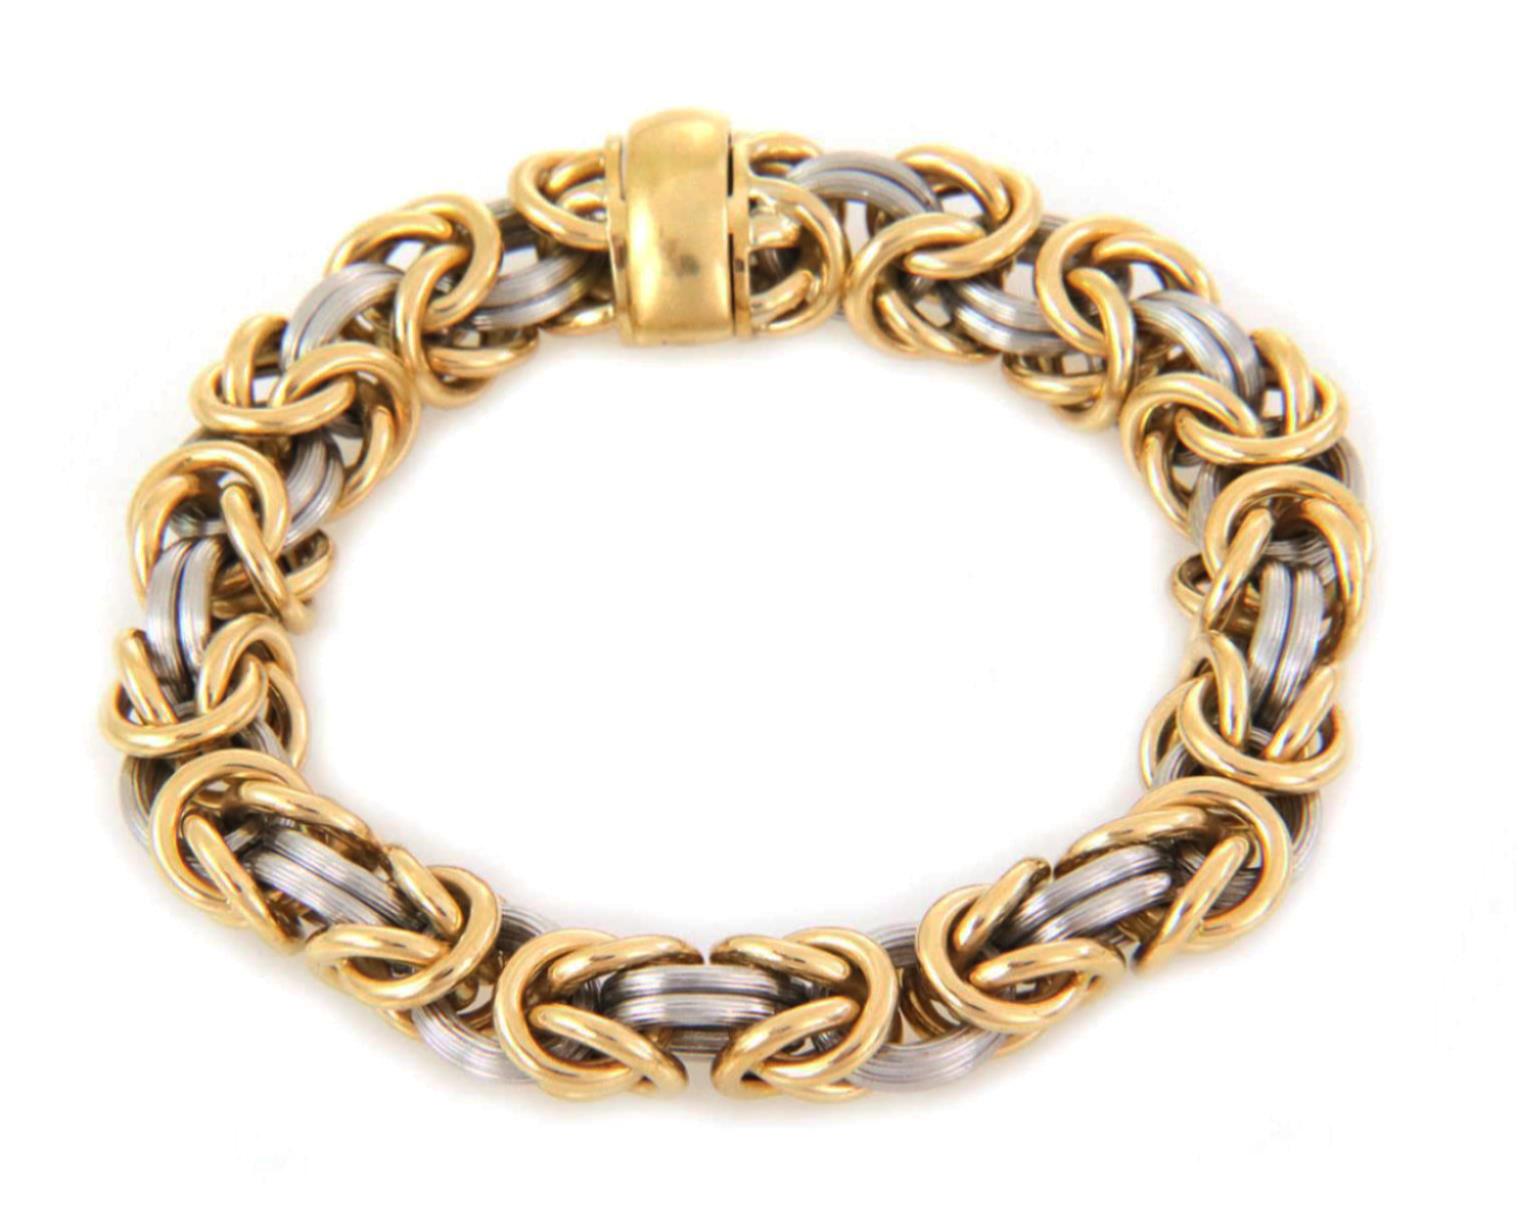 This is a bold fashionable bracelet from designer ROM Germany, crafted from 18k yellow gold and platinum featuring a 8mm thick byzantine links with polished yellow gold and fine fluted platinum ring links. The bracelet secure with a slide slot snap